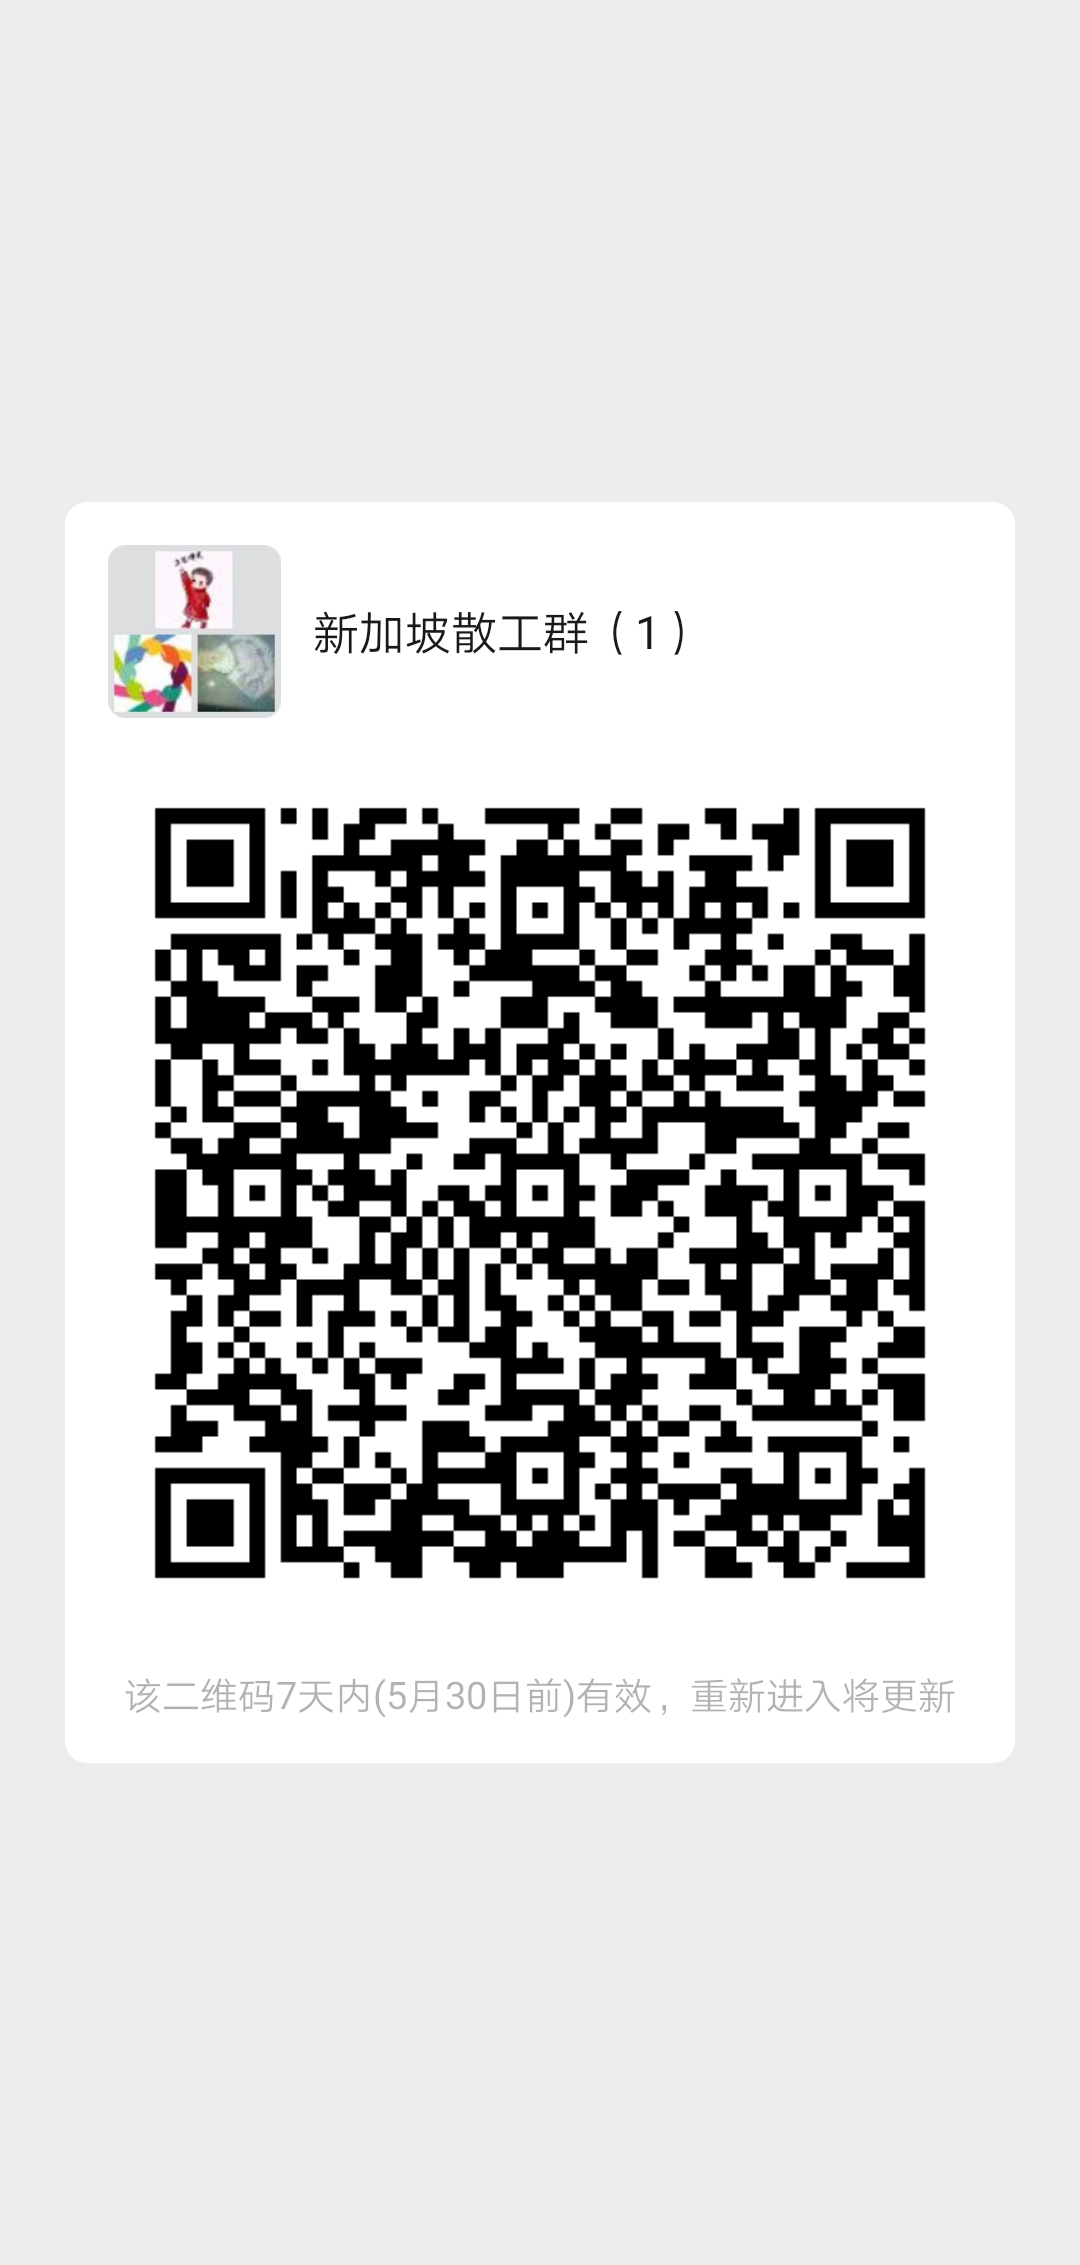 mmqrcode1621764770274.png